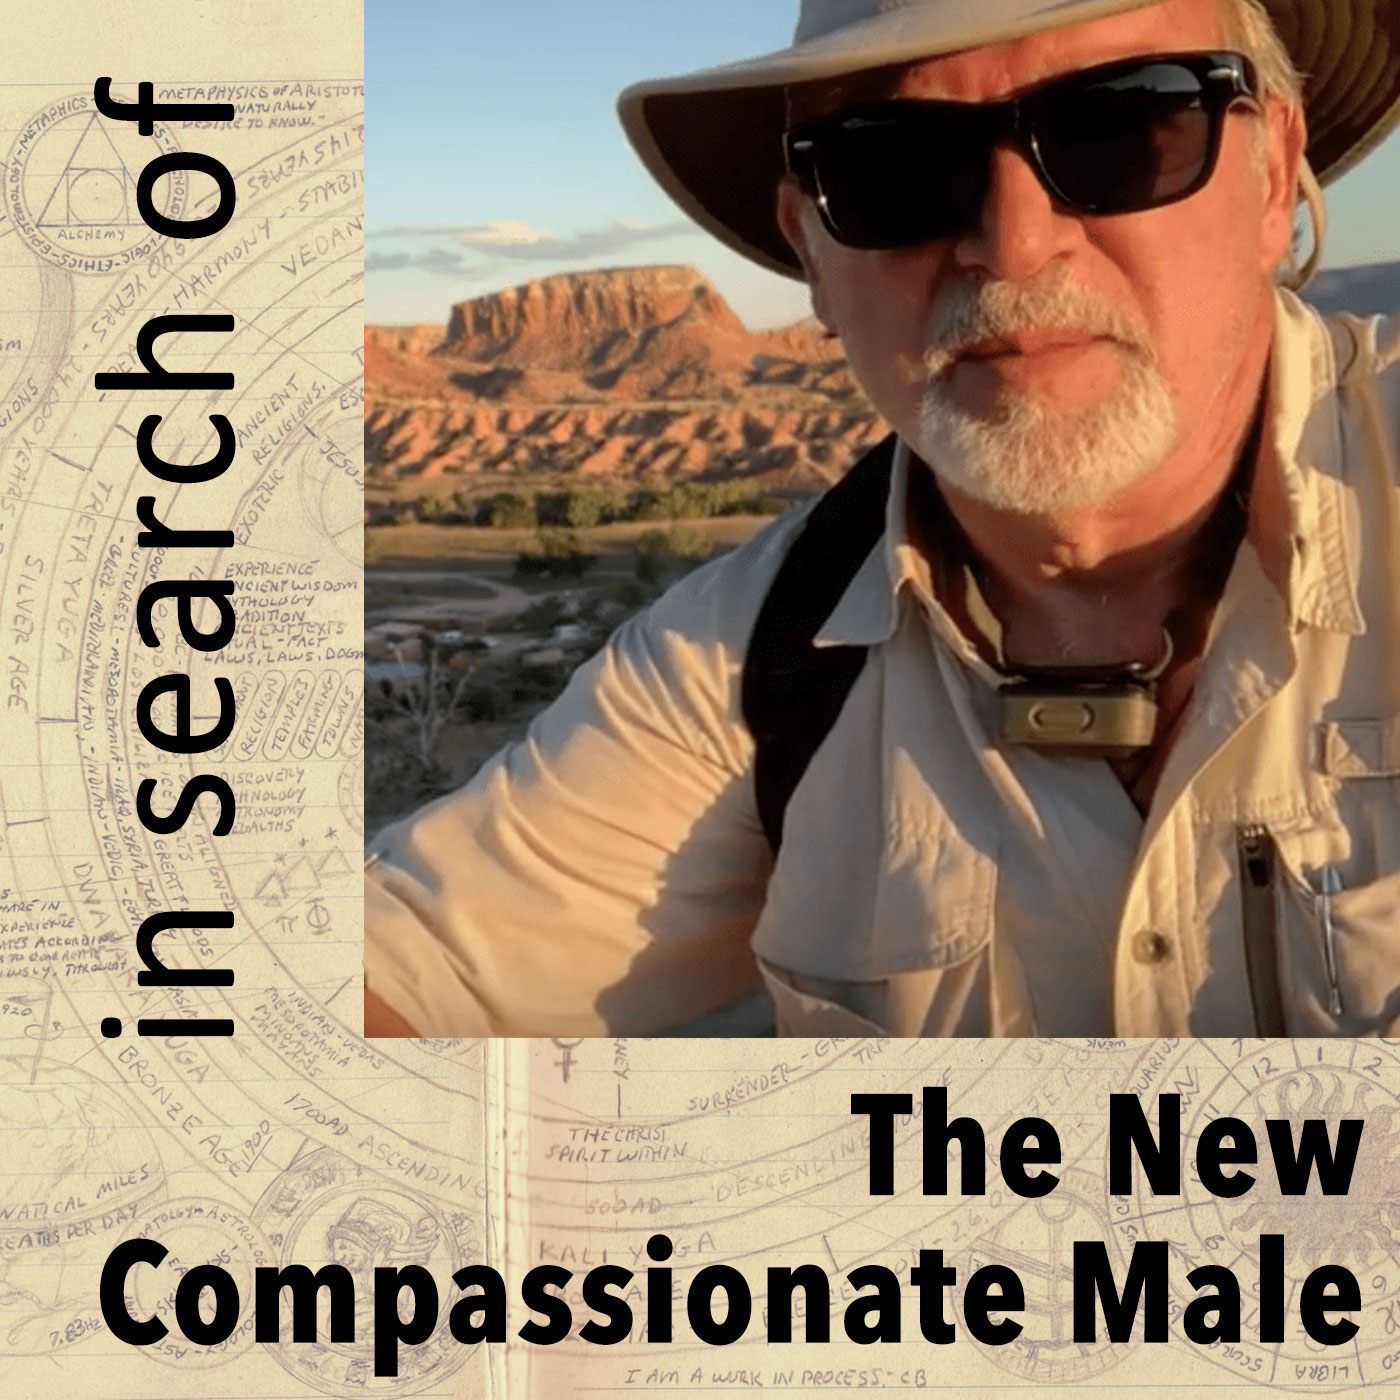 In Search of the New Compassionate Male